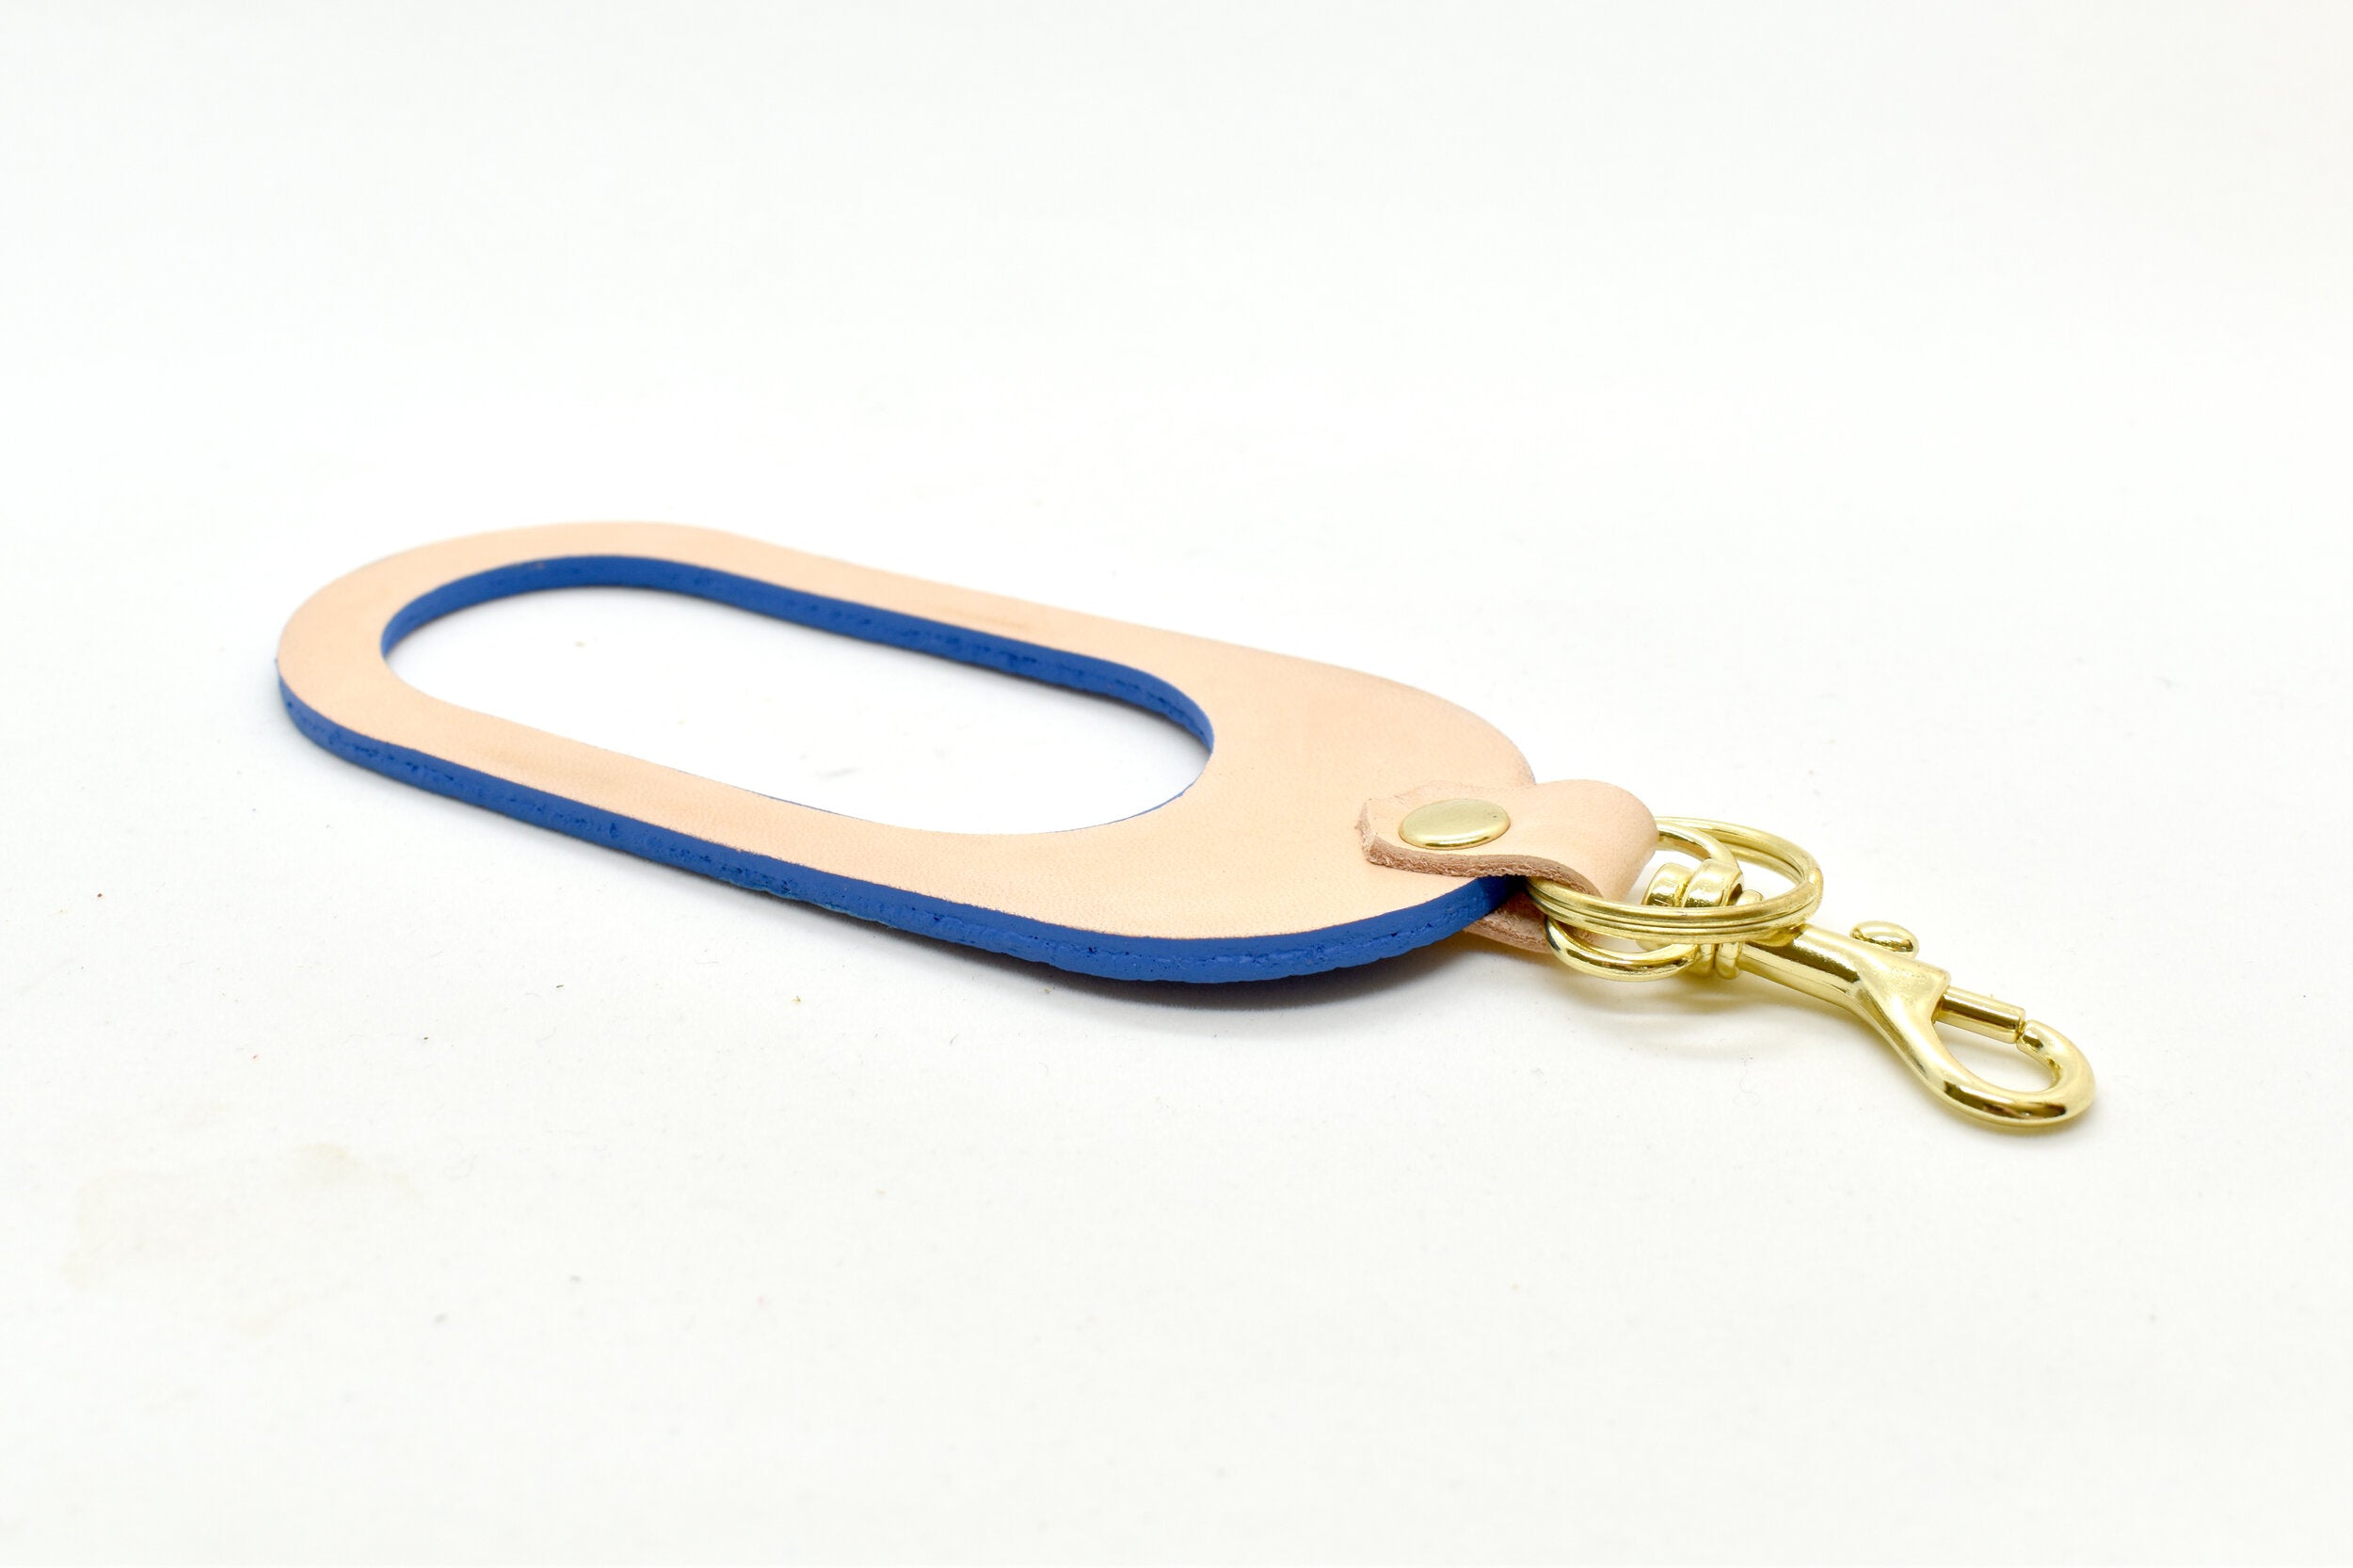 A dual-sided leather multicolor keychain in veg tan leather and saturated Matisse Blue leather